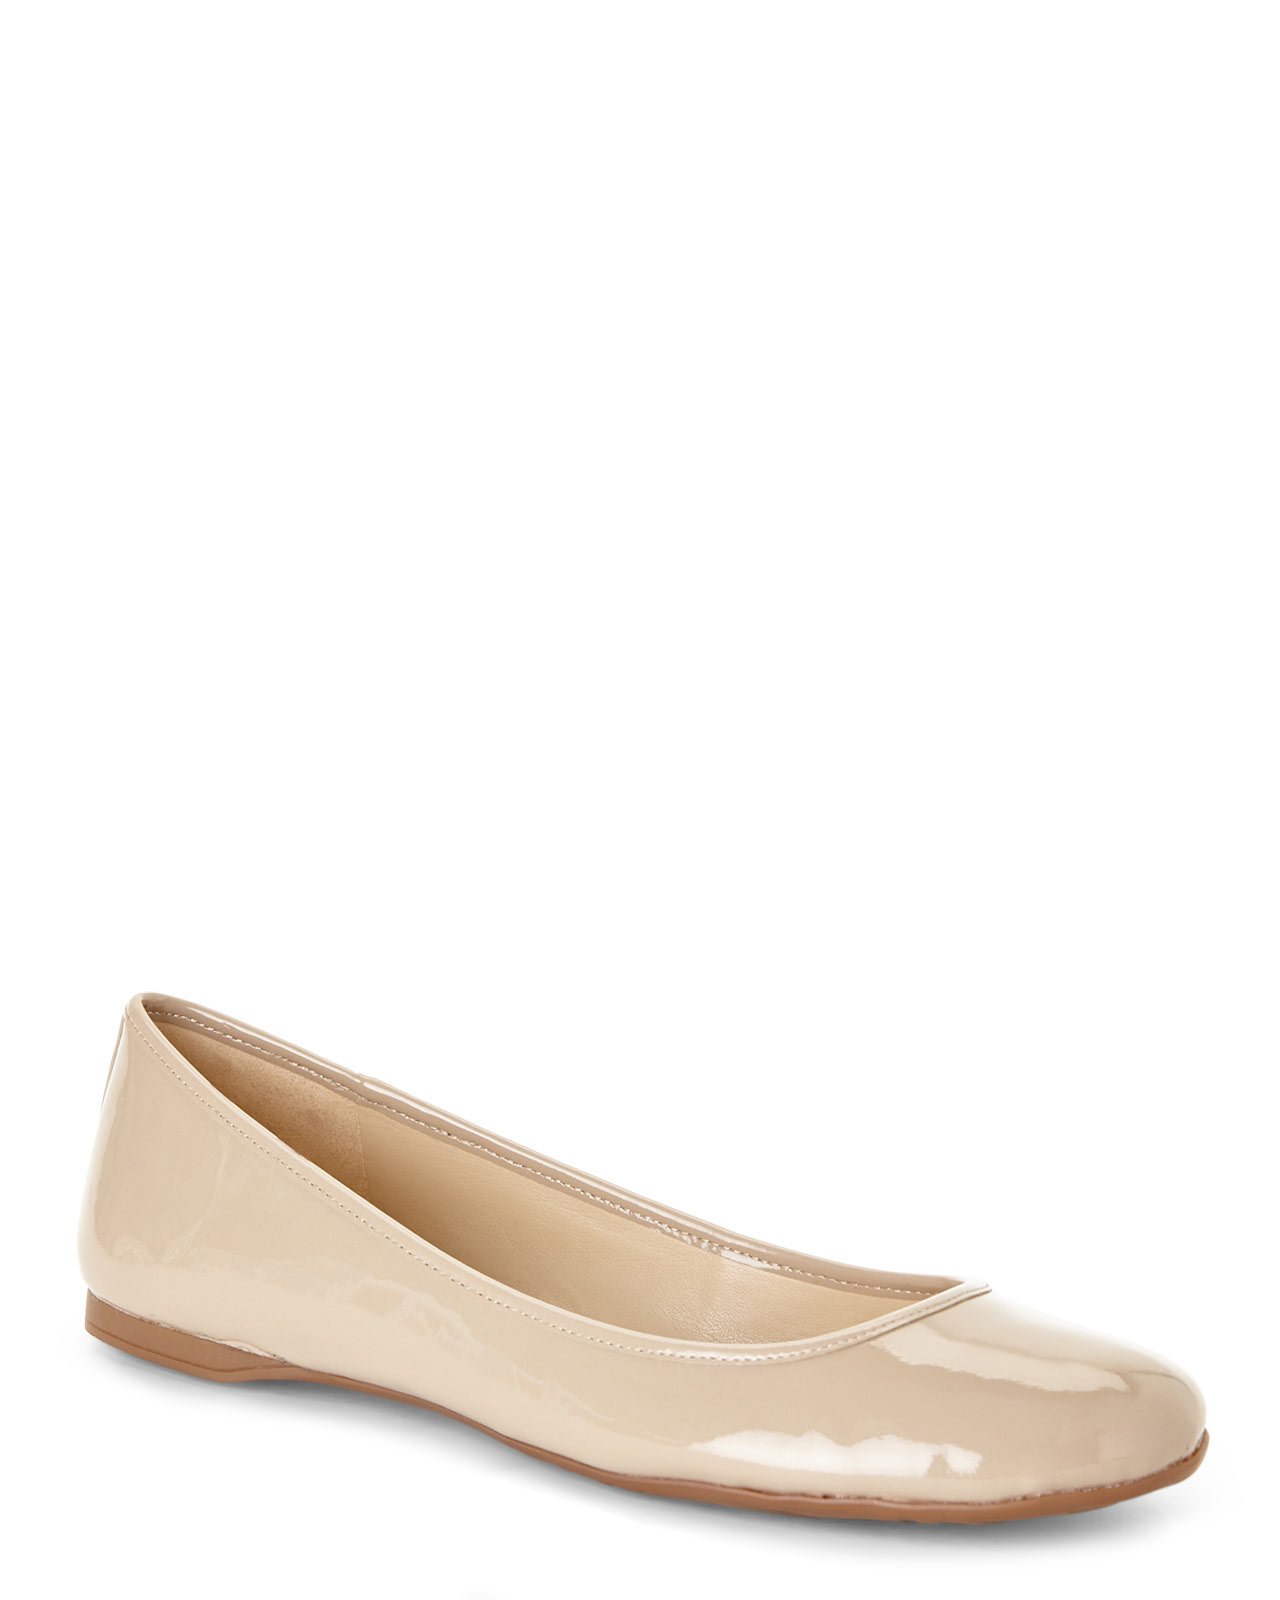 Lyst Nine West Nude Patent Ballet Flats In Natural